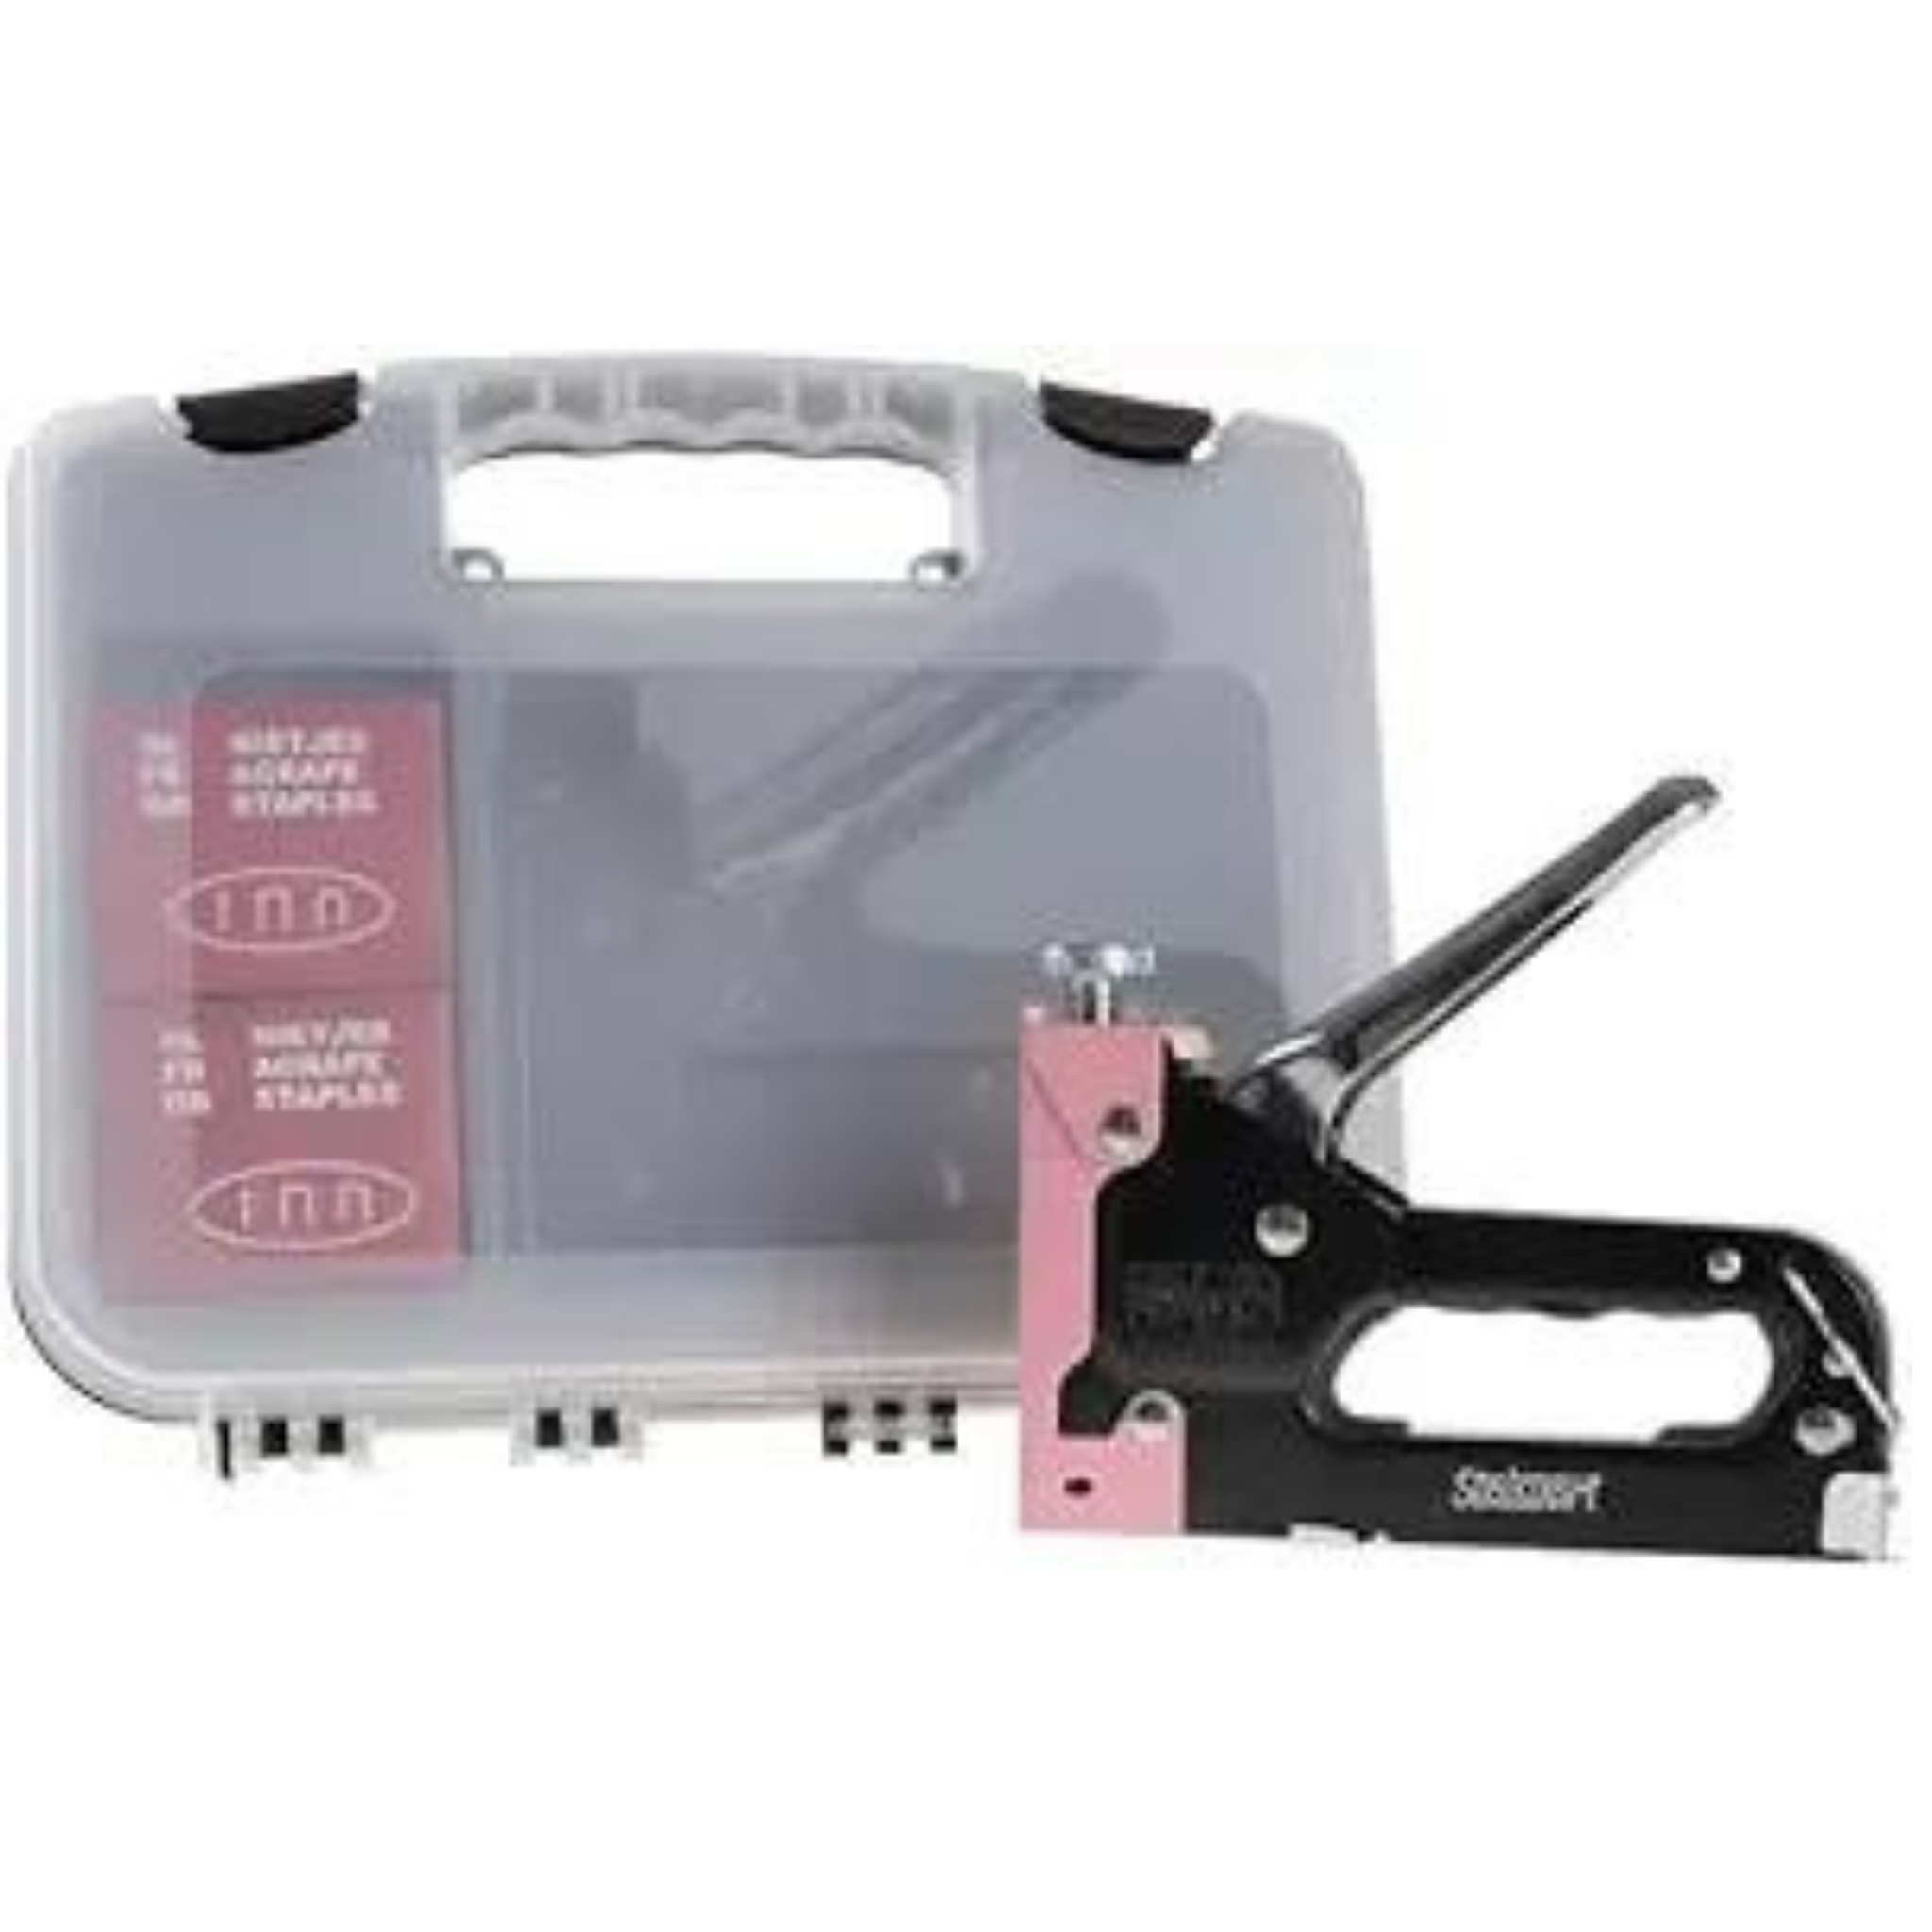 Staple Gun with 600 Staples & Carrying Case